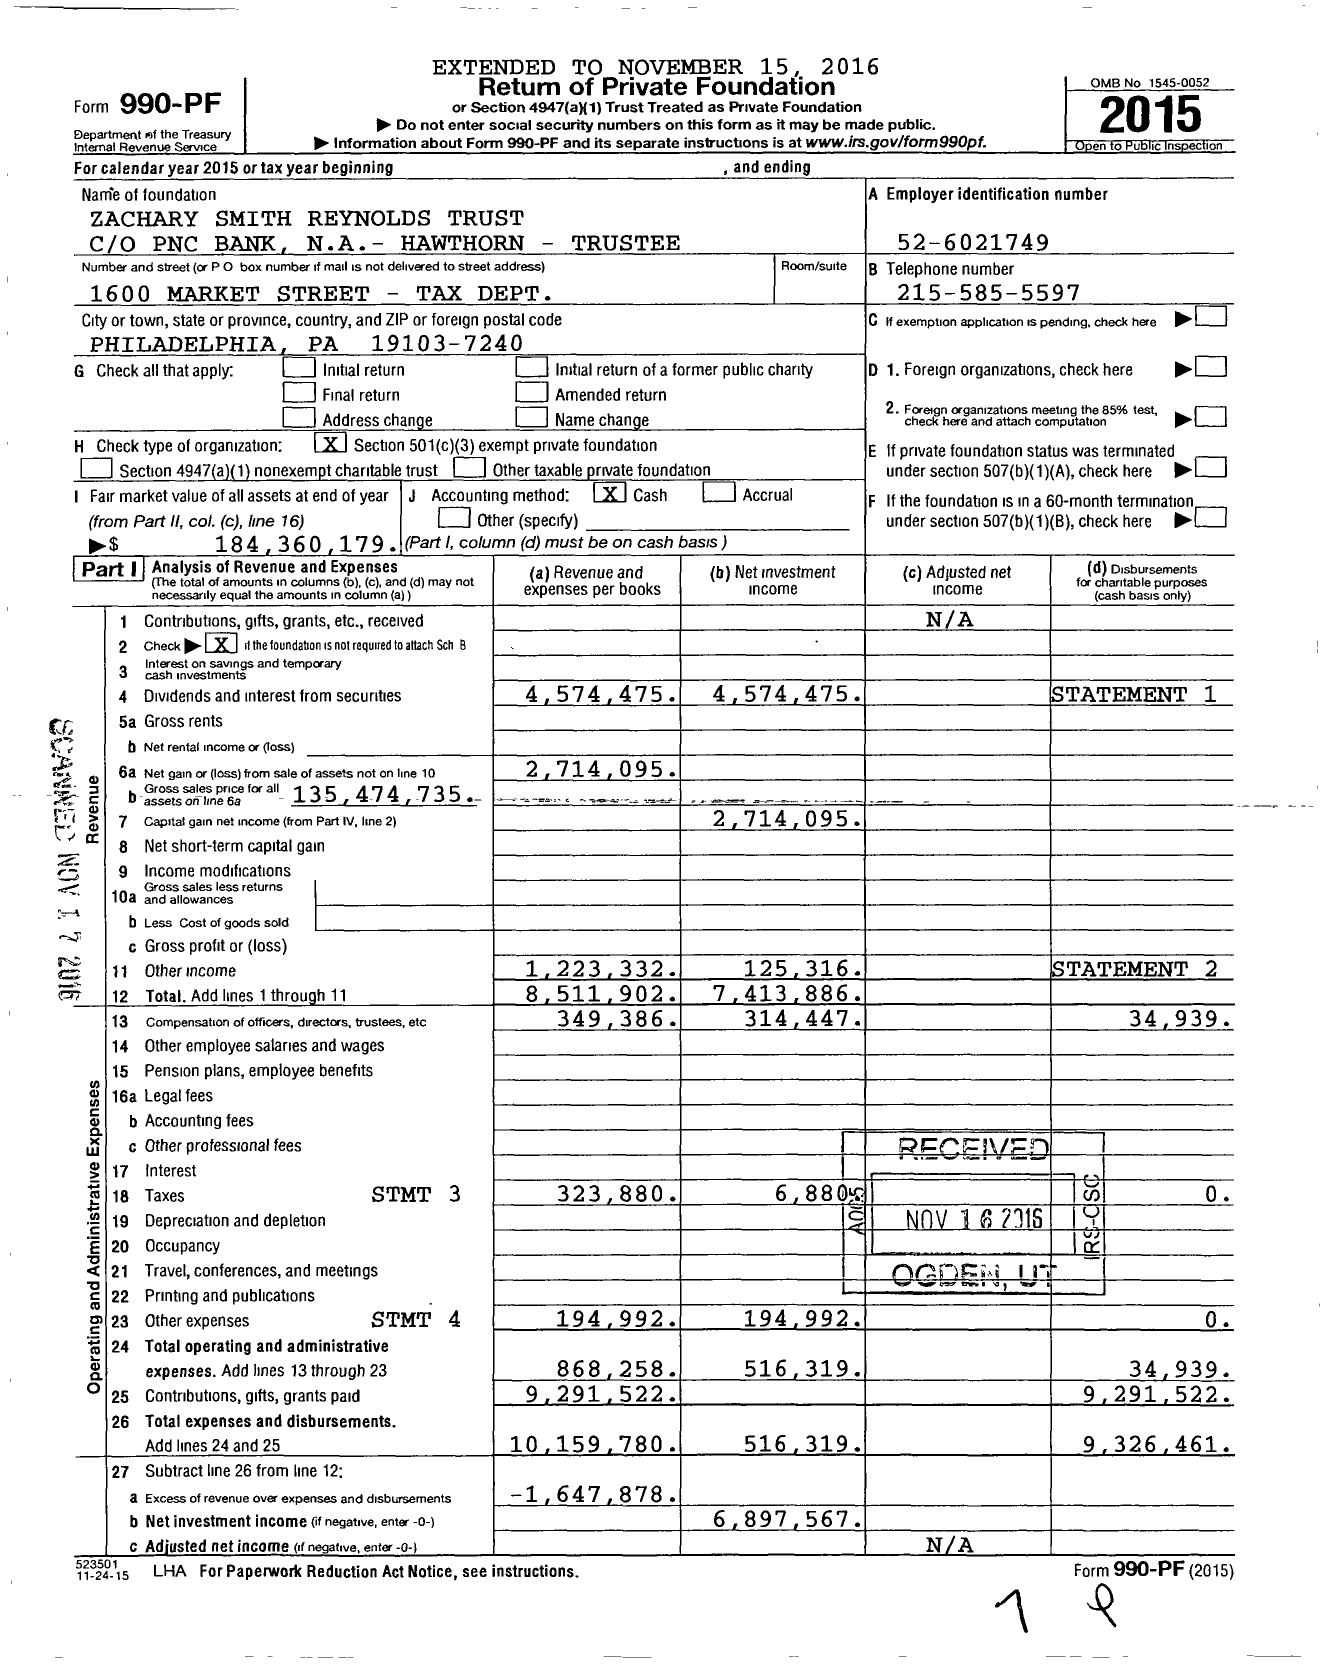 Image of first page of 2015 Form 990PF for Zachary Smith Reynolds Trust